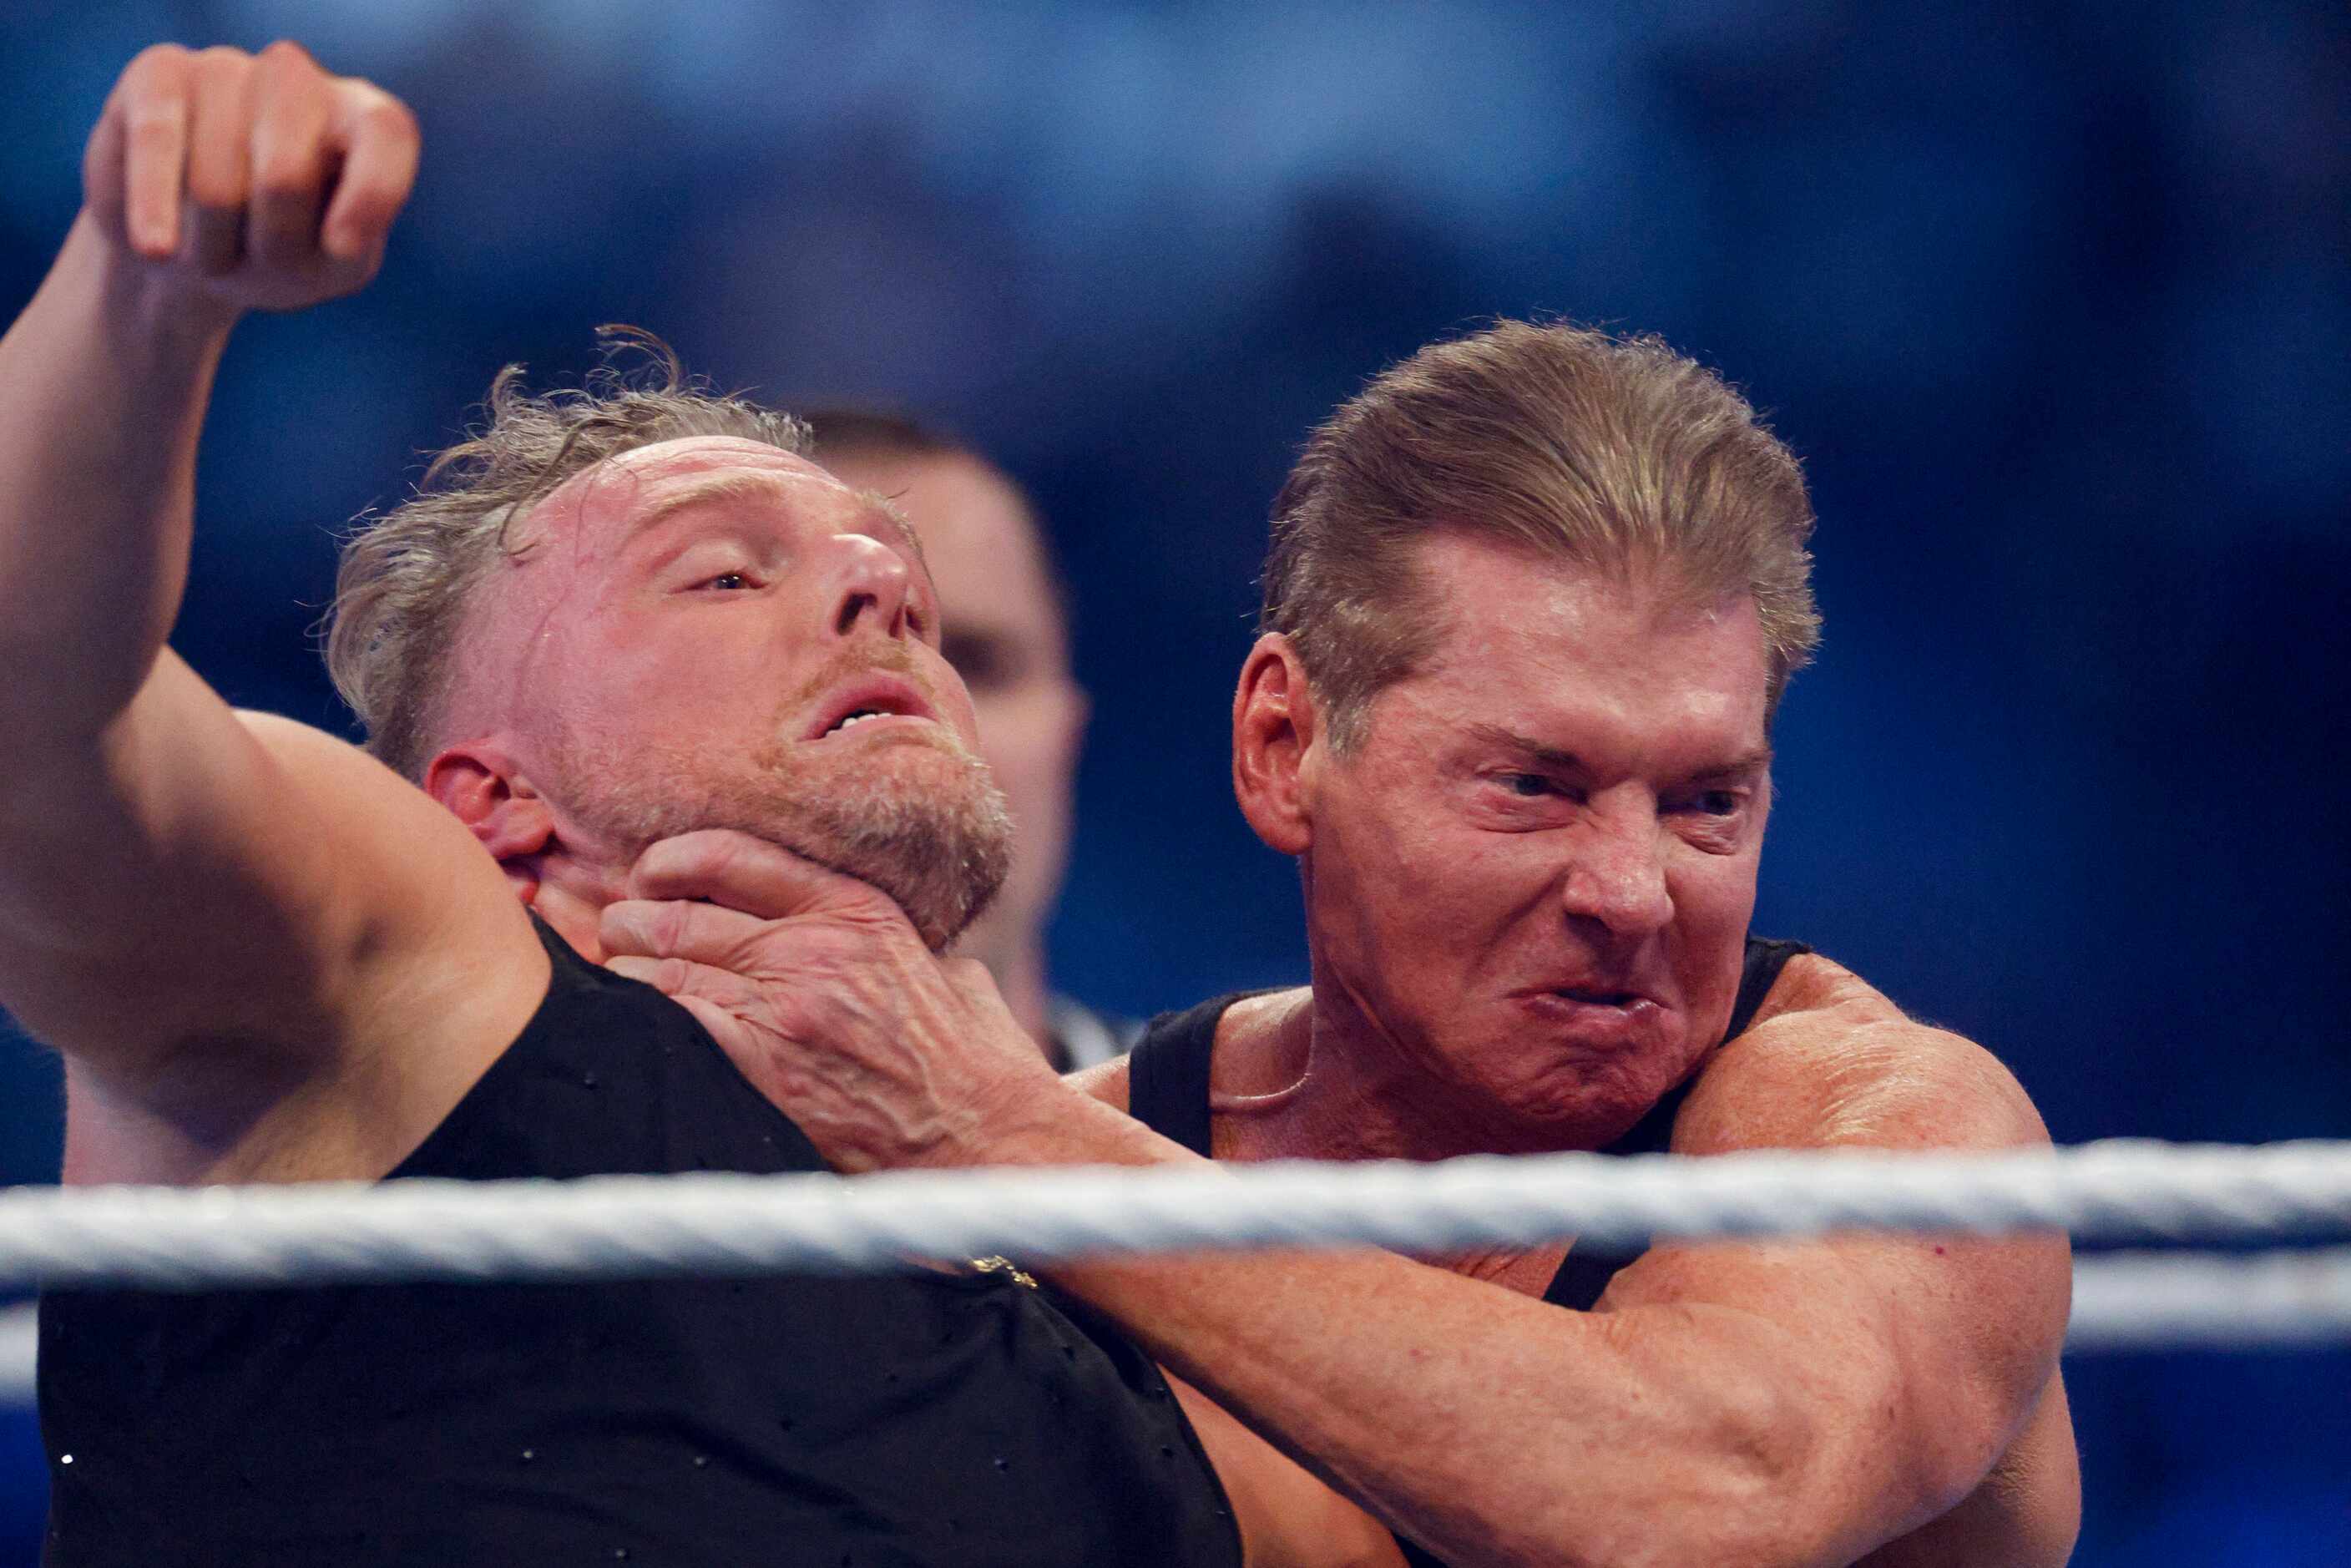 Vince McMahon (right) throws Pat McAfee into the ropes during a match at WrestleMania Sunday...